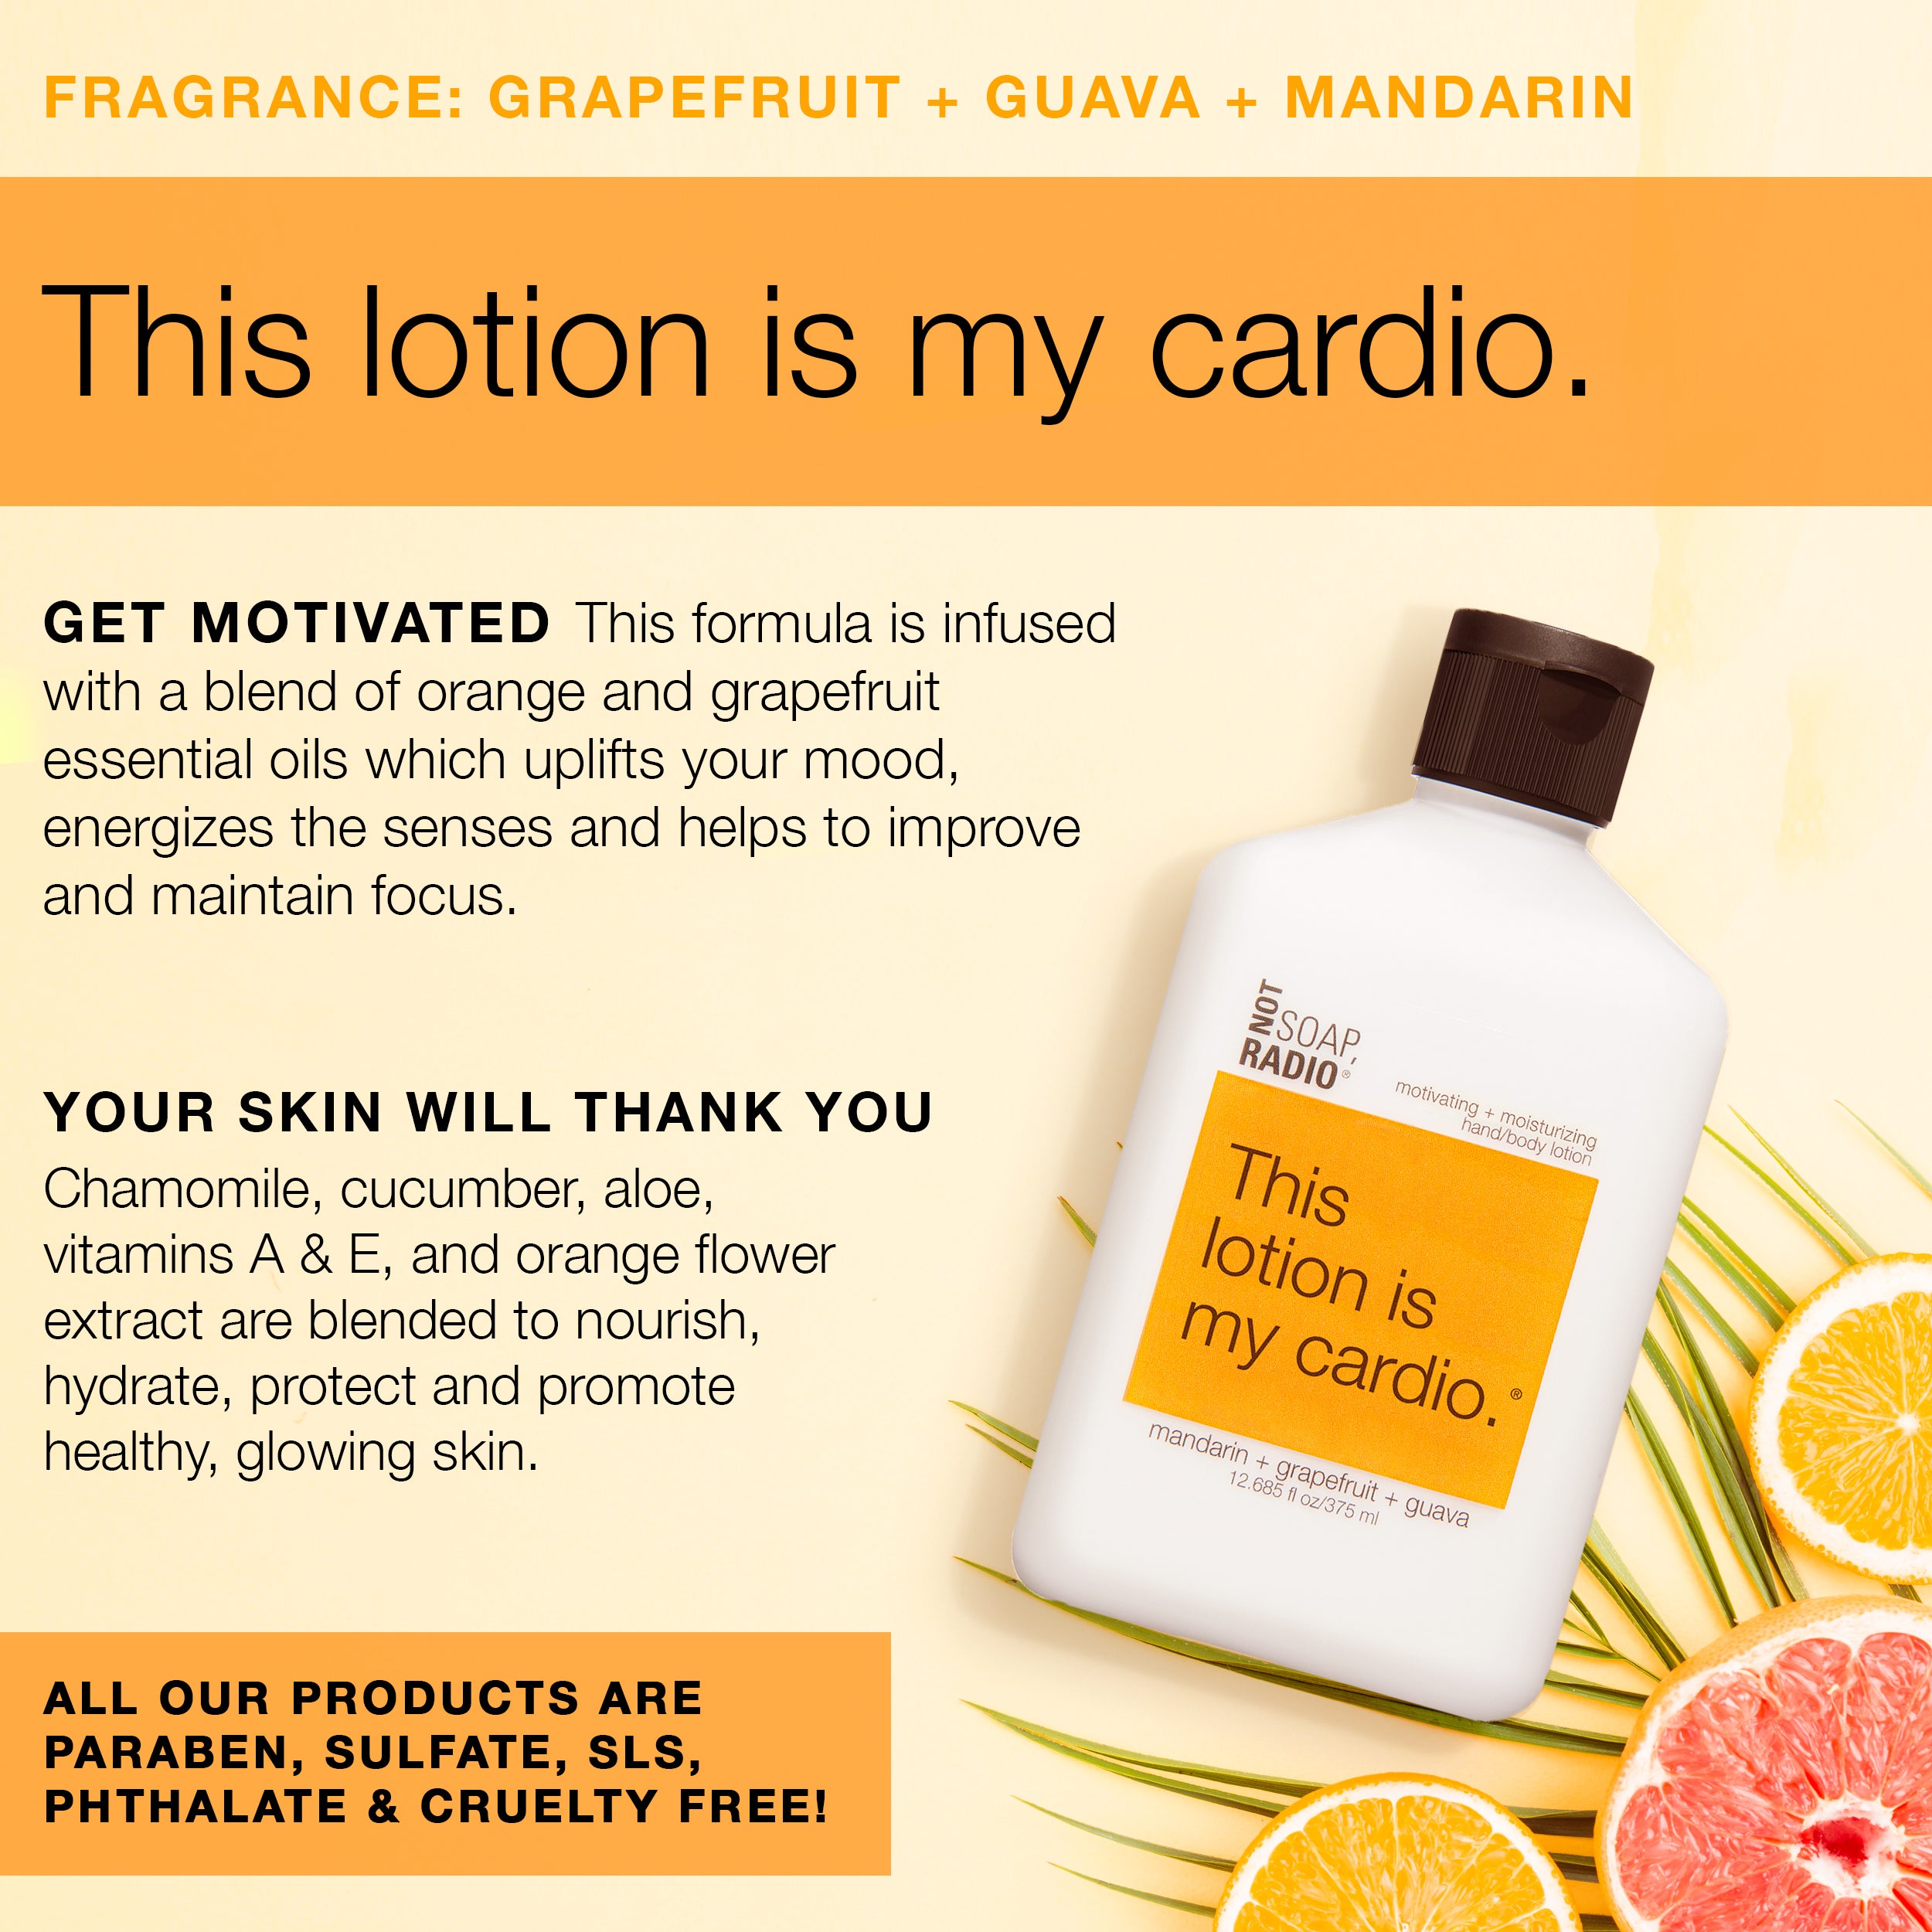 This lotion is my cardio. <b>hand/body lotion</b>